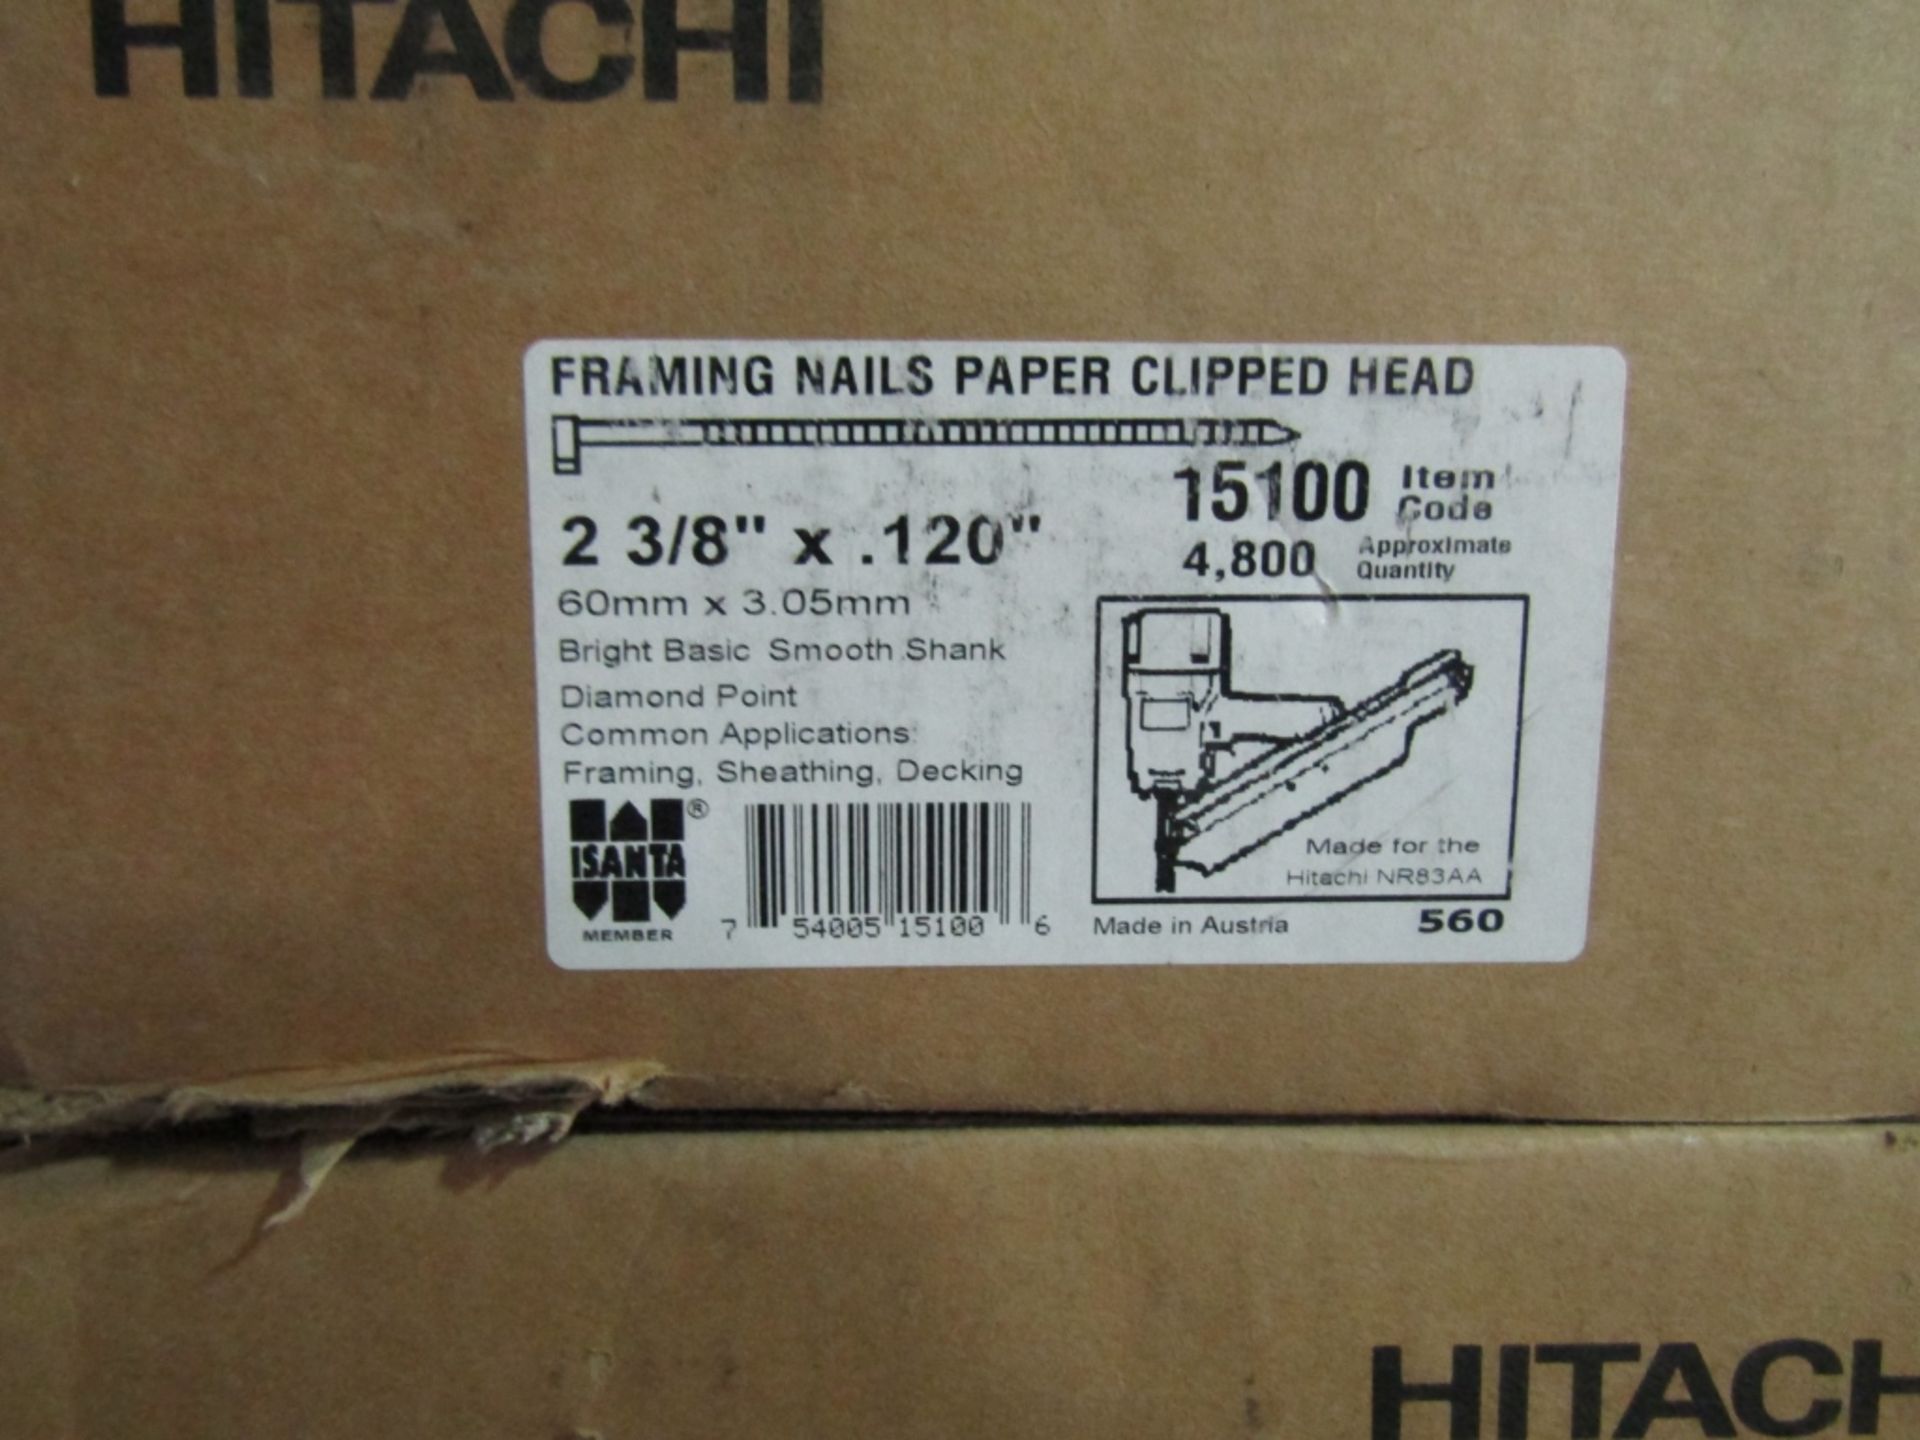 (7) New Boxes Hitachi Framing Nails, Paper Clipped Head2 3/8" x .120" Approximate 4800 Quantity - Image 3 of 3